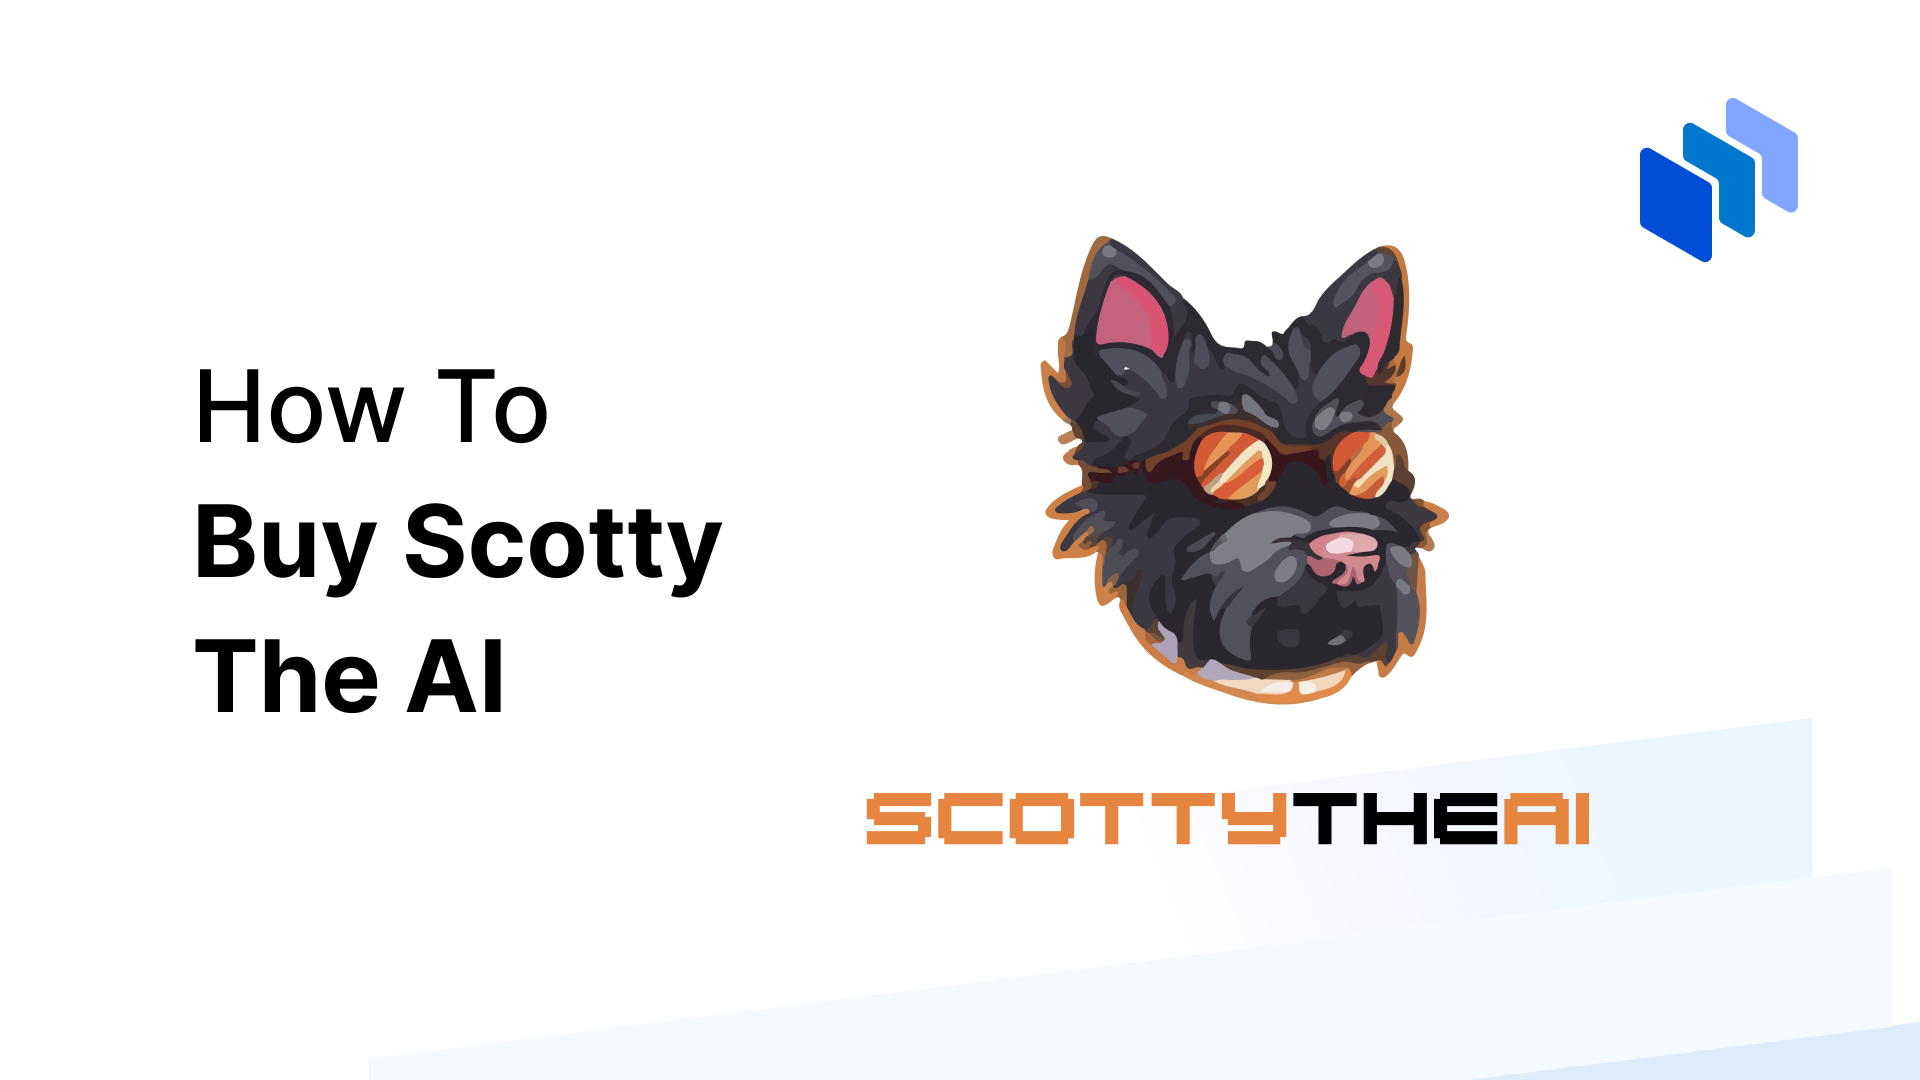 How To Buy Scotty The AI